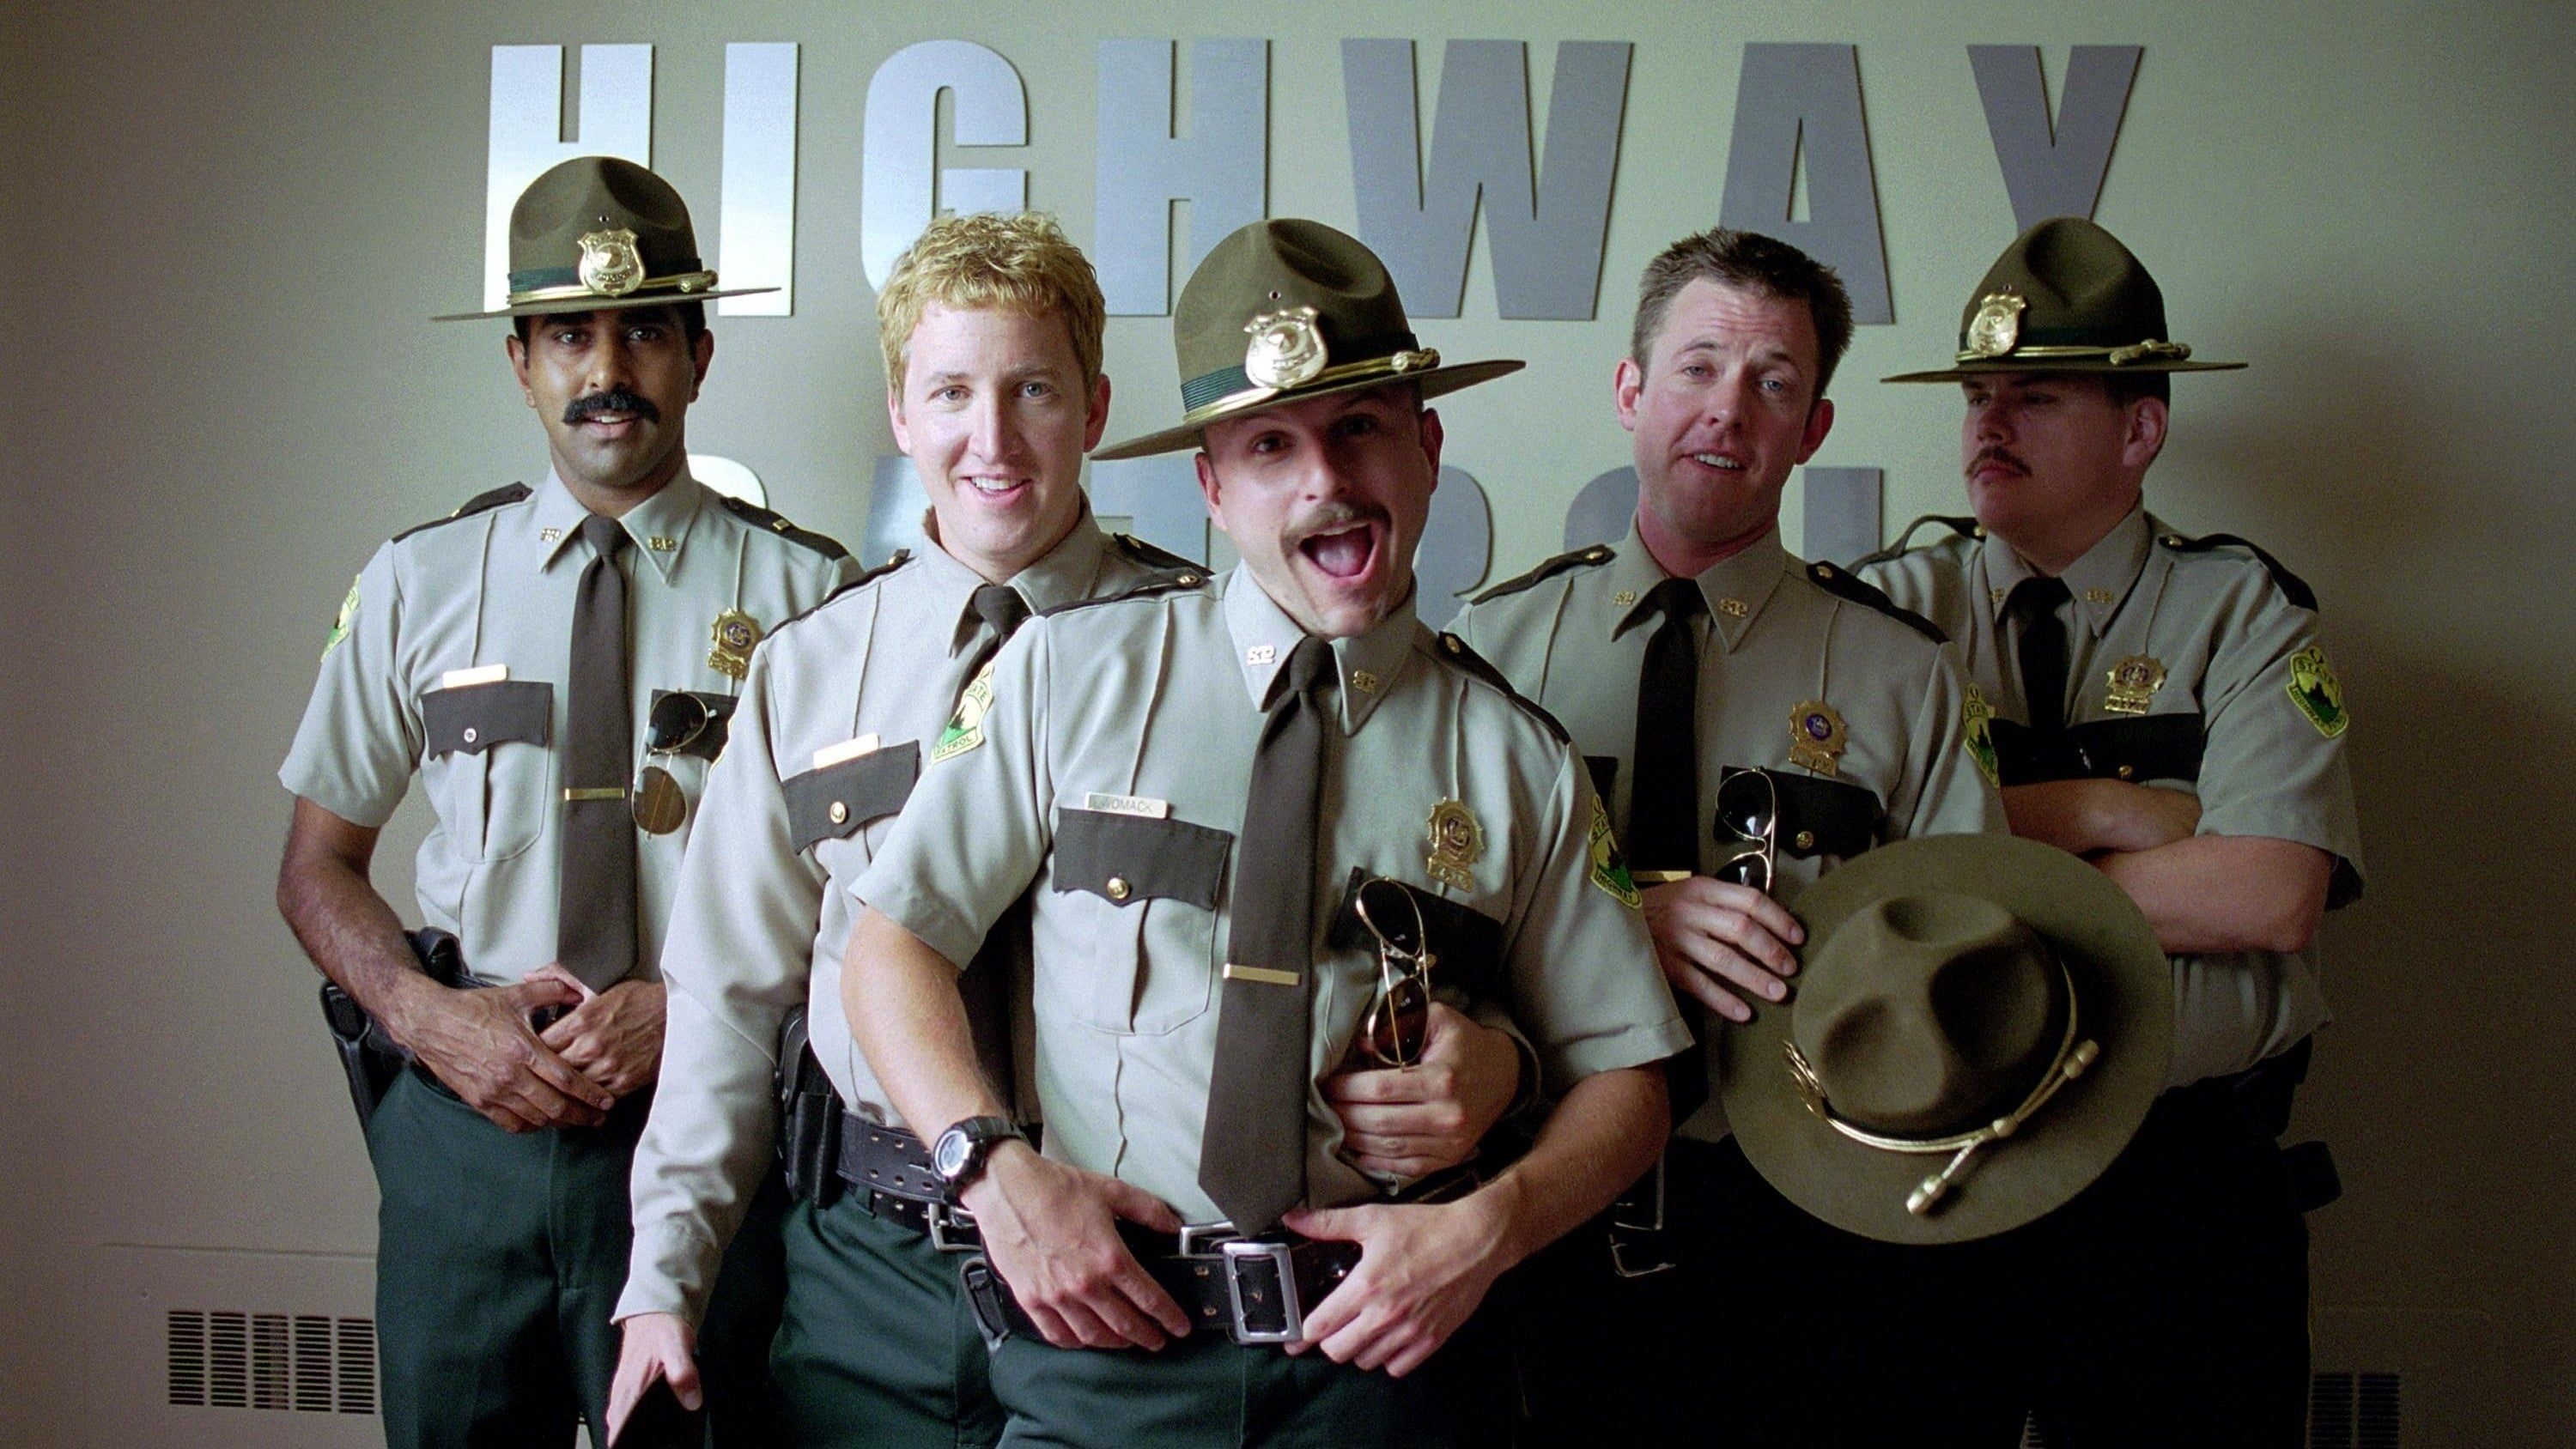 super troopers 2 full movie free download